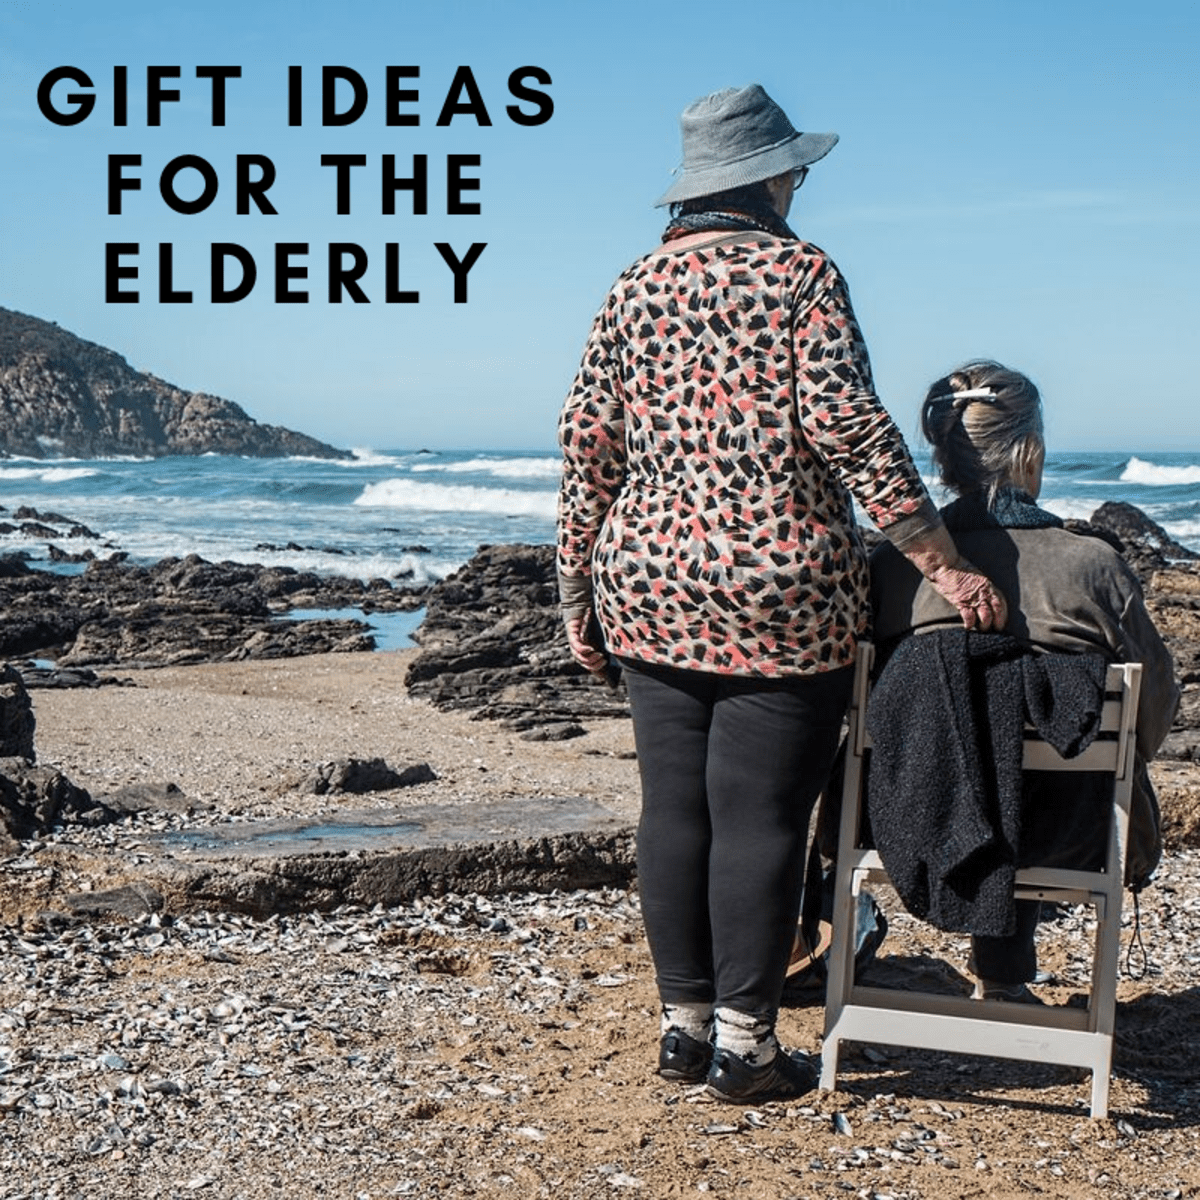 47+ Great Gifts for People in Wheelchairs (You'd Never Think Of)